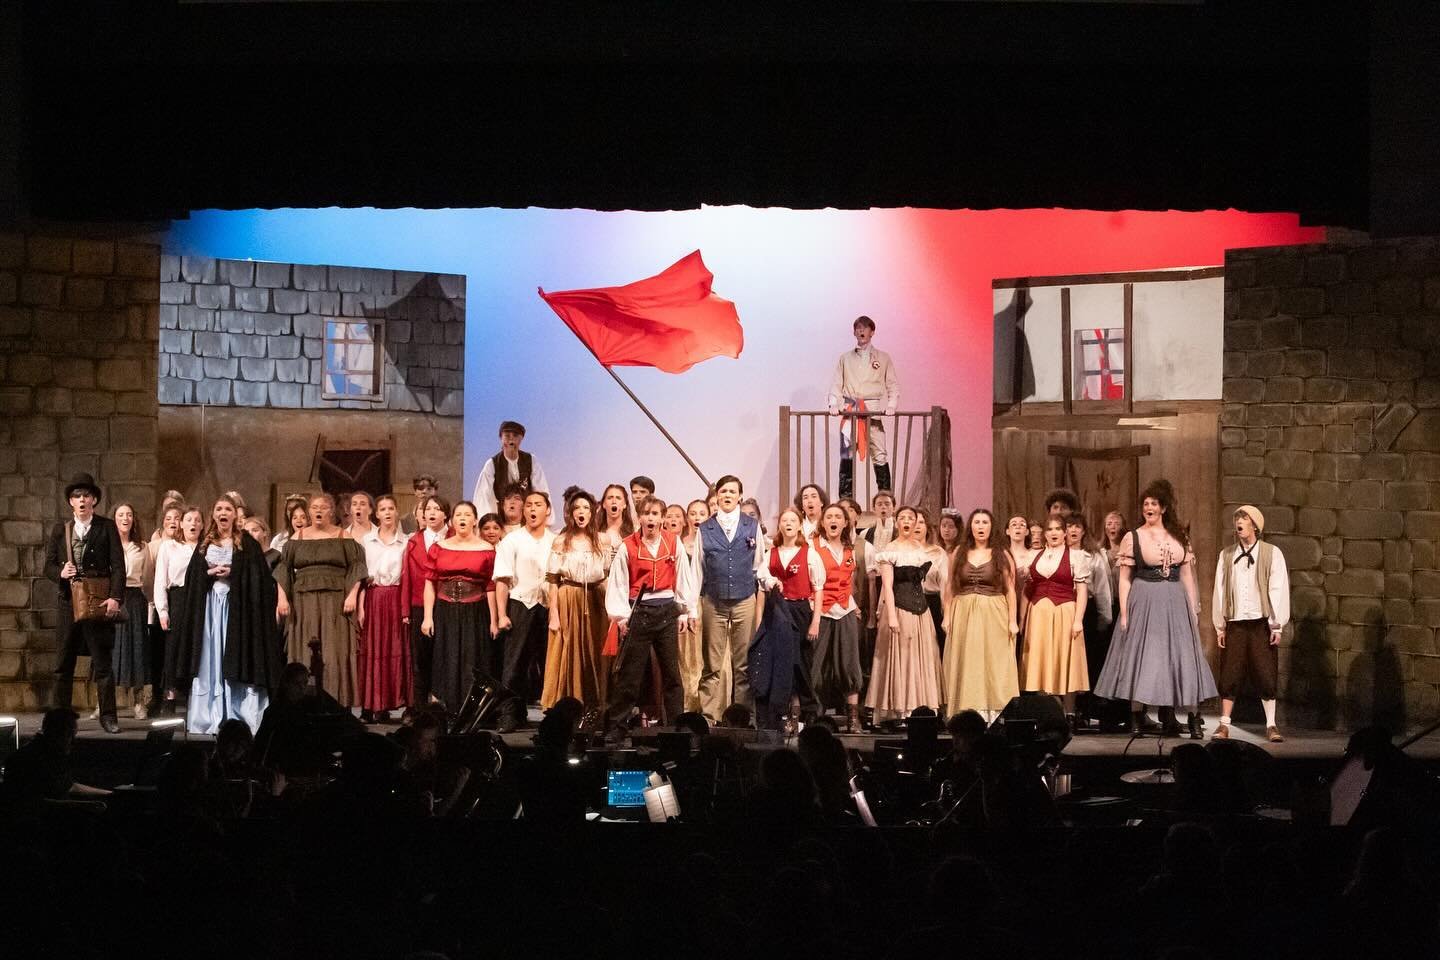 Yorktown&rsquo;s Production of Les Mis&eacute;rables!!

This was a truly remarkable show that featured tons and tons of talent throughout every single department. I was so happy to serve as the sound designer and engineer for this wonderful productio